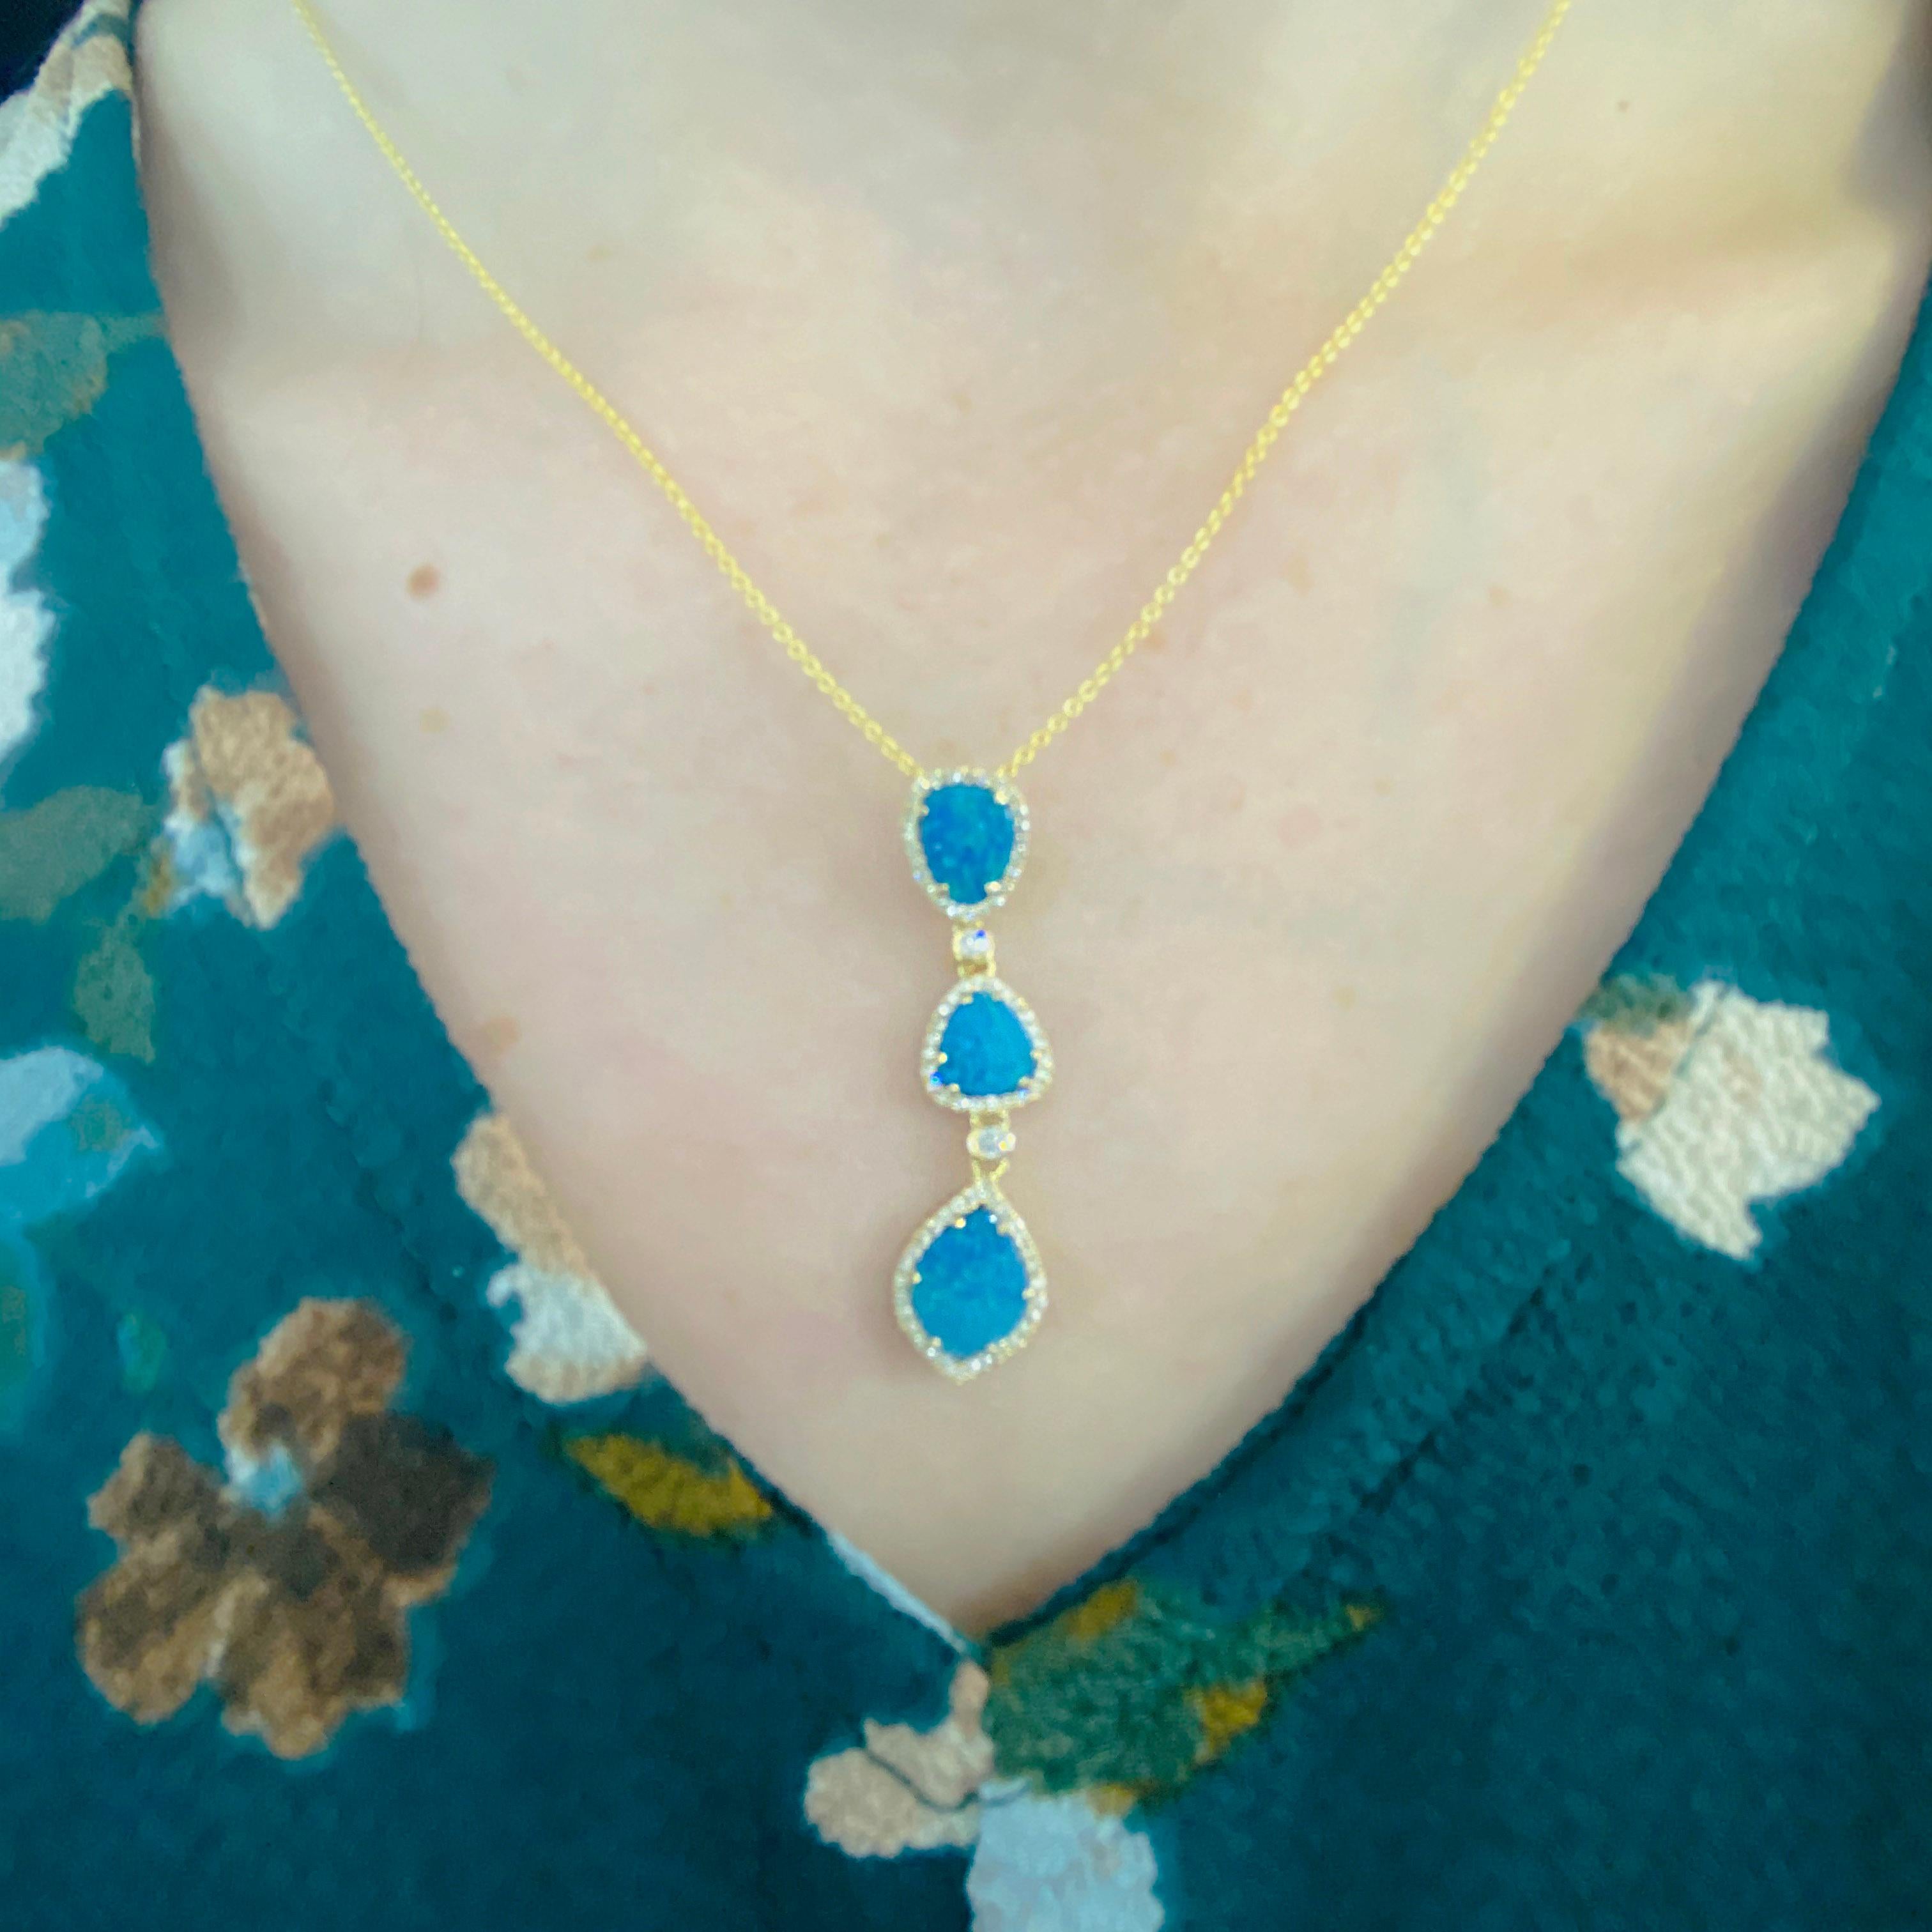 These stunningly beautiful black opal doublets set in polished 14k yellow gold and dripping with diamonds provide a look that is very modern yet classic! This necklace is very fashionable and can add a touch of style to any outfit, yet it is also